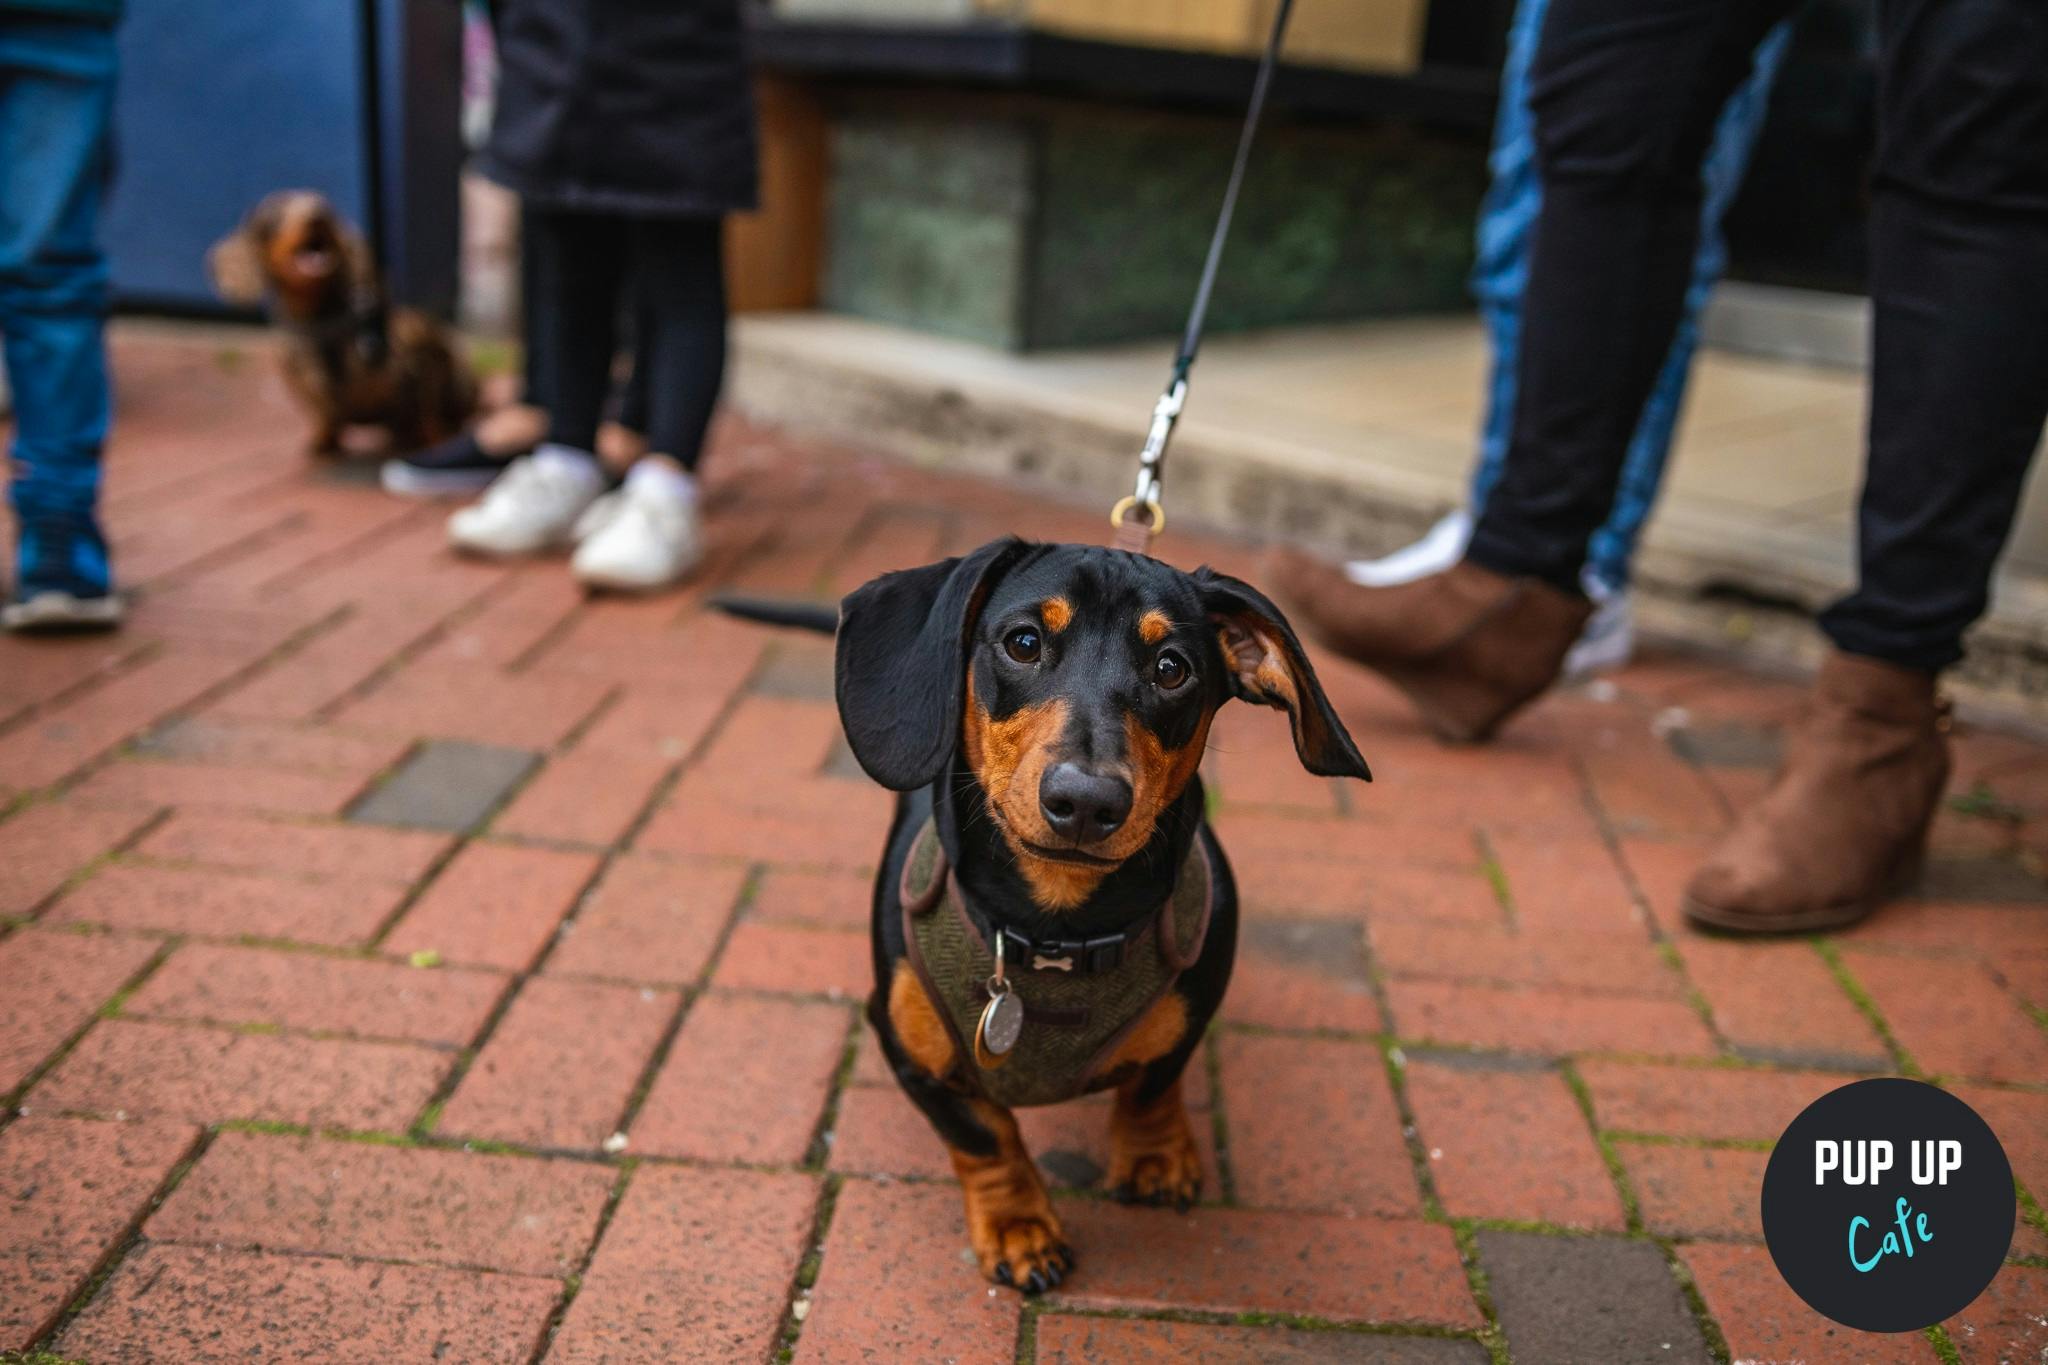 Pop up sausage dog party for pooches and their owners is happening in Leeds